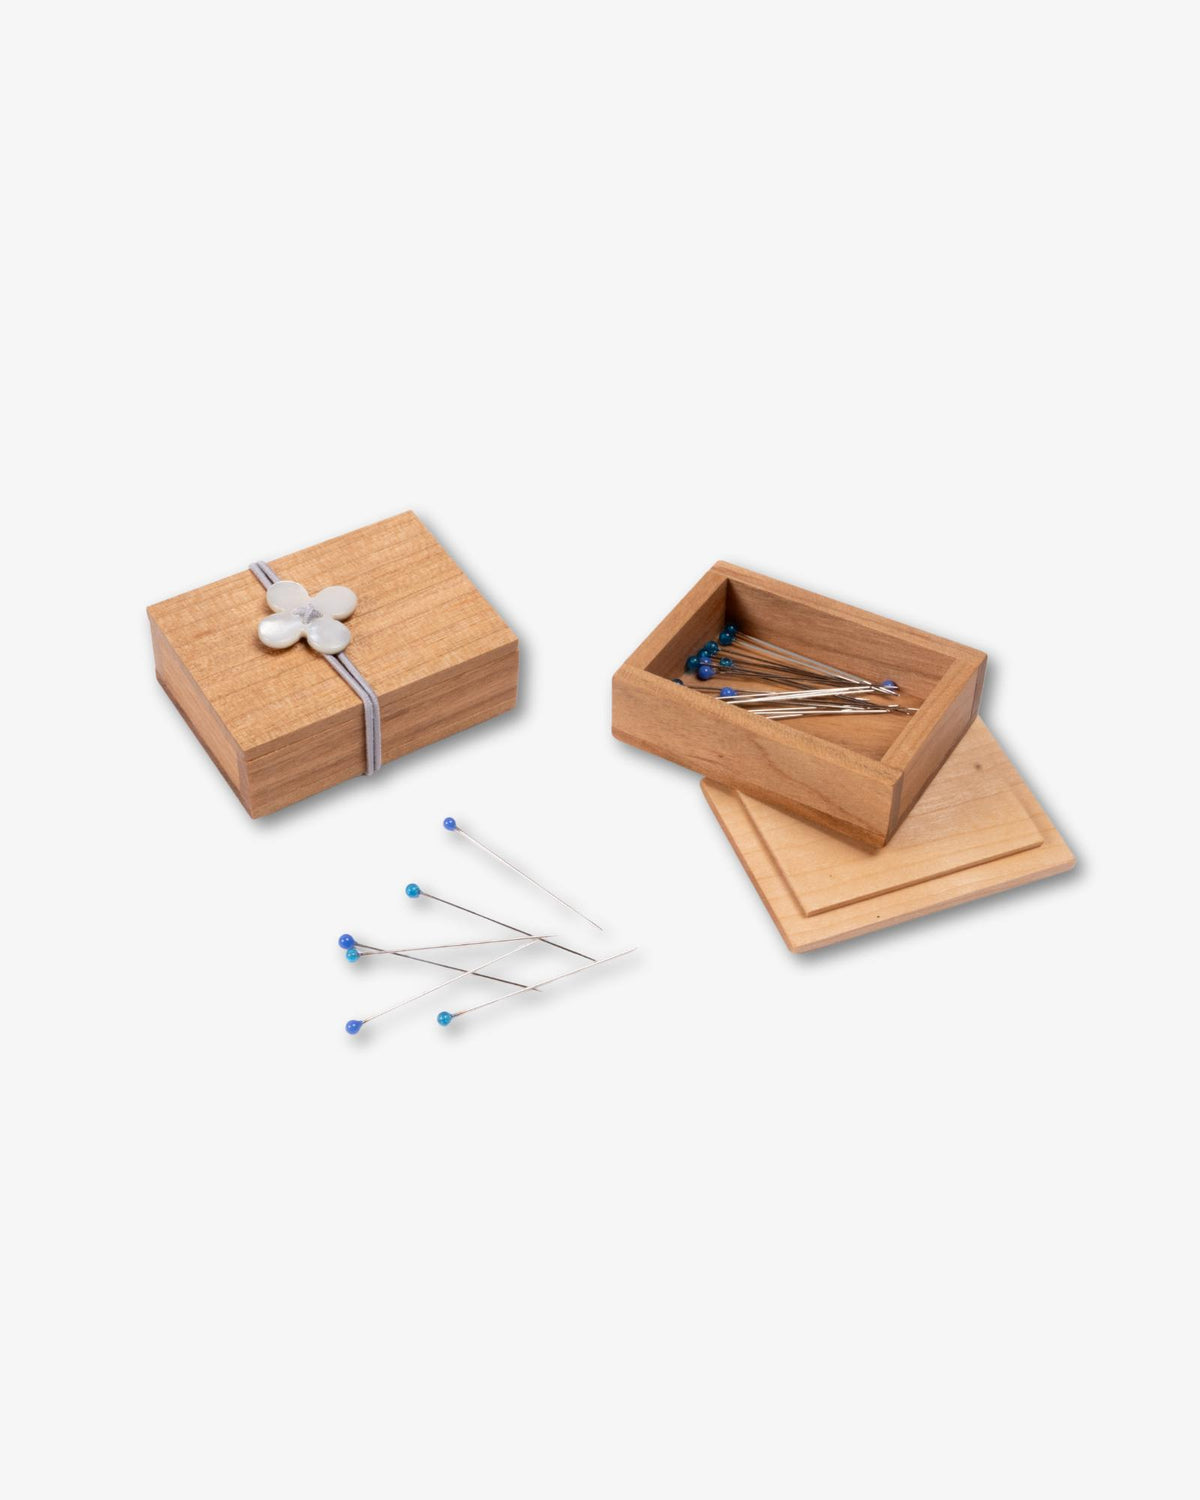 Glass Sewing Pins in Cherry Wood Box